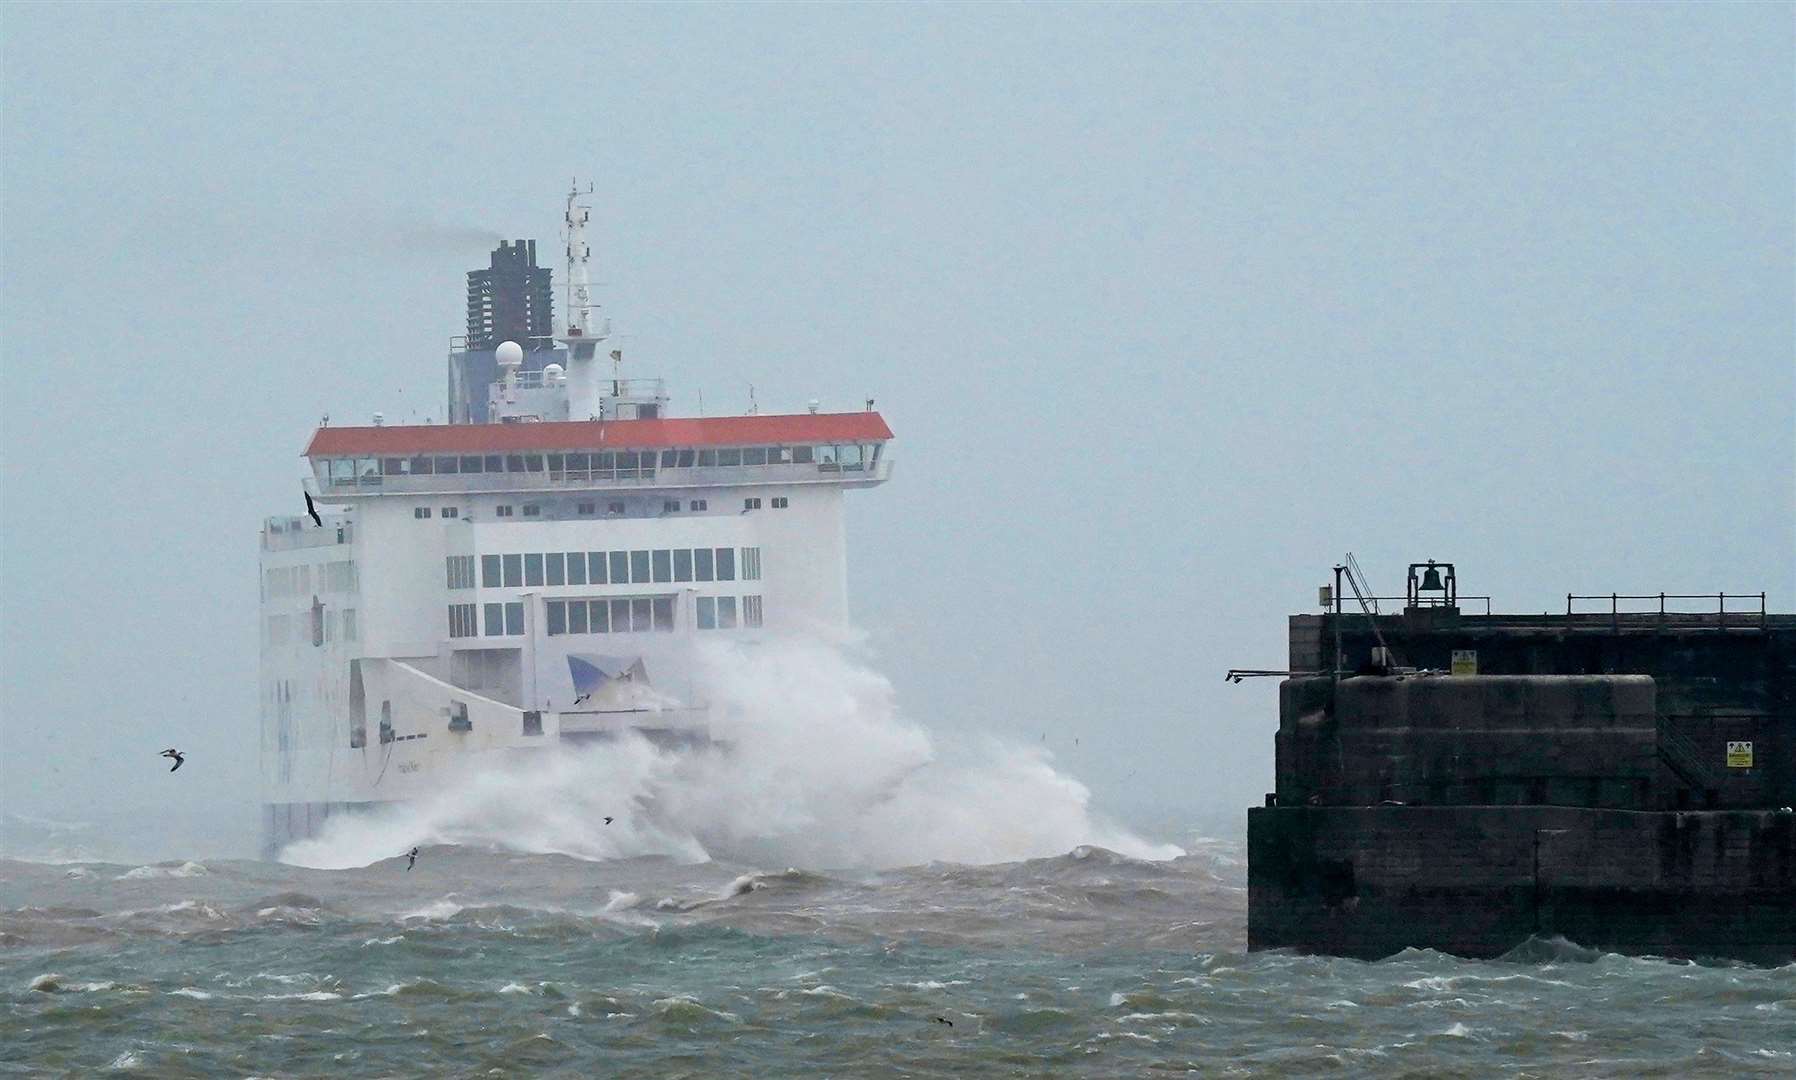 The P&O Pride of Kent ferry arriving at the Port of Dover (Gareth Fuller/PA)